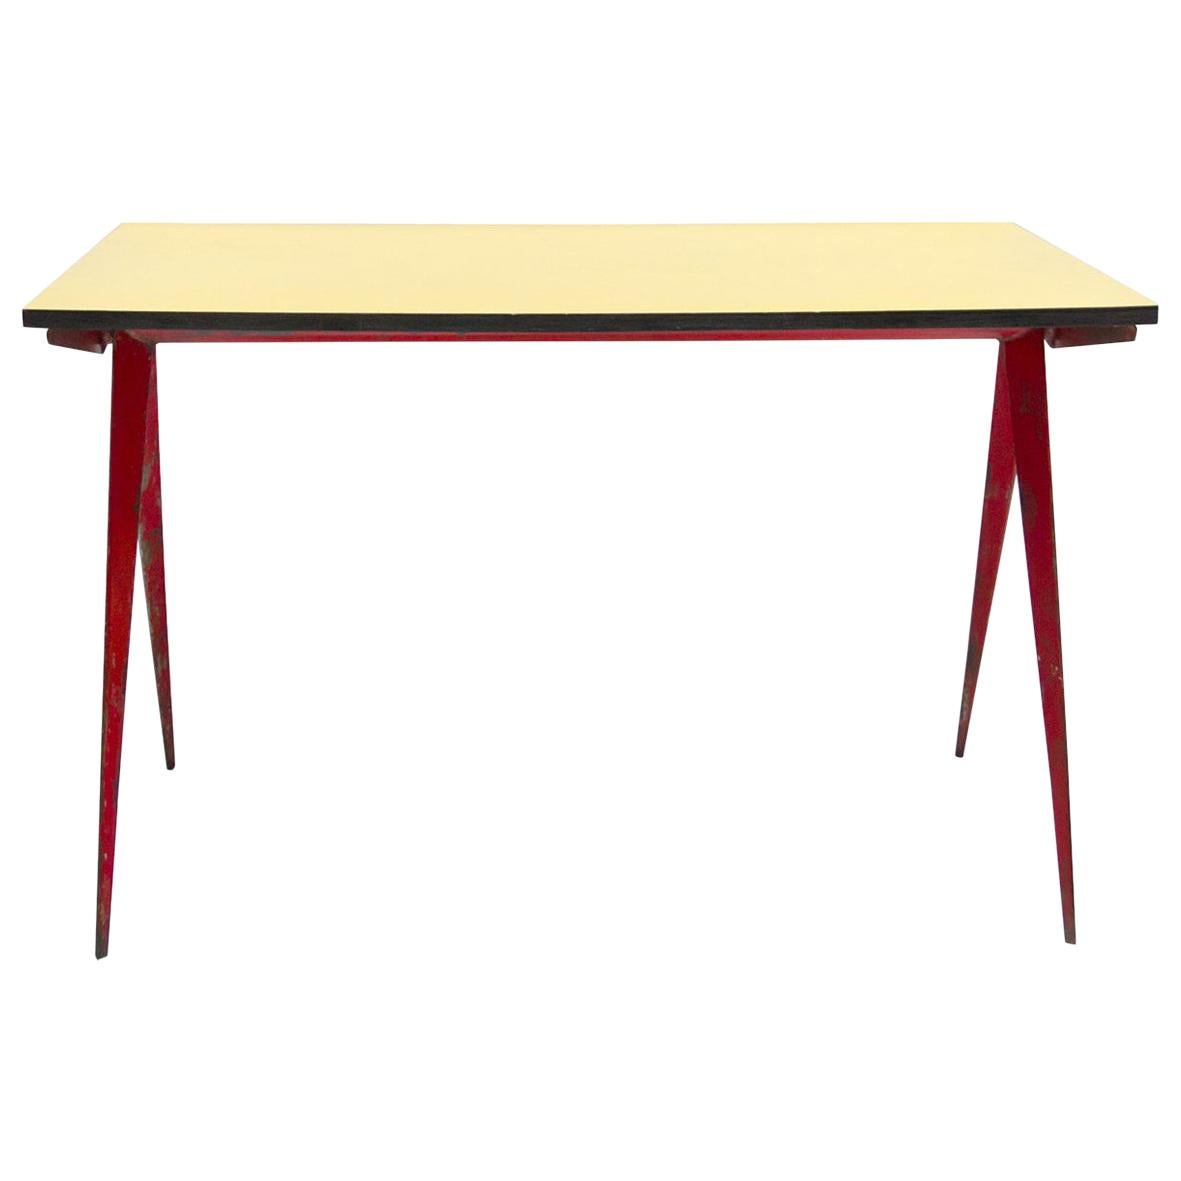 Small Cafeteria Table a.k.a "Compas" Designed by Jean Prouve, circa 1950, France For Sale